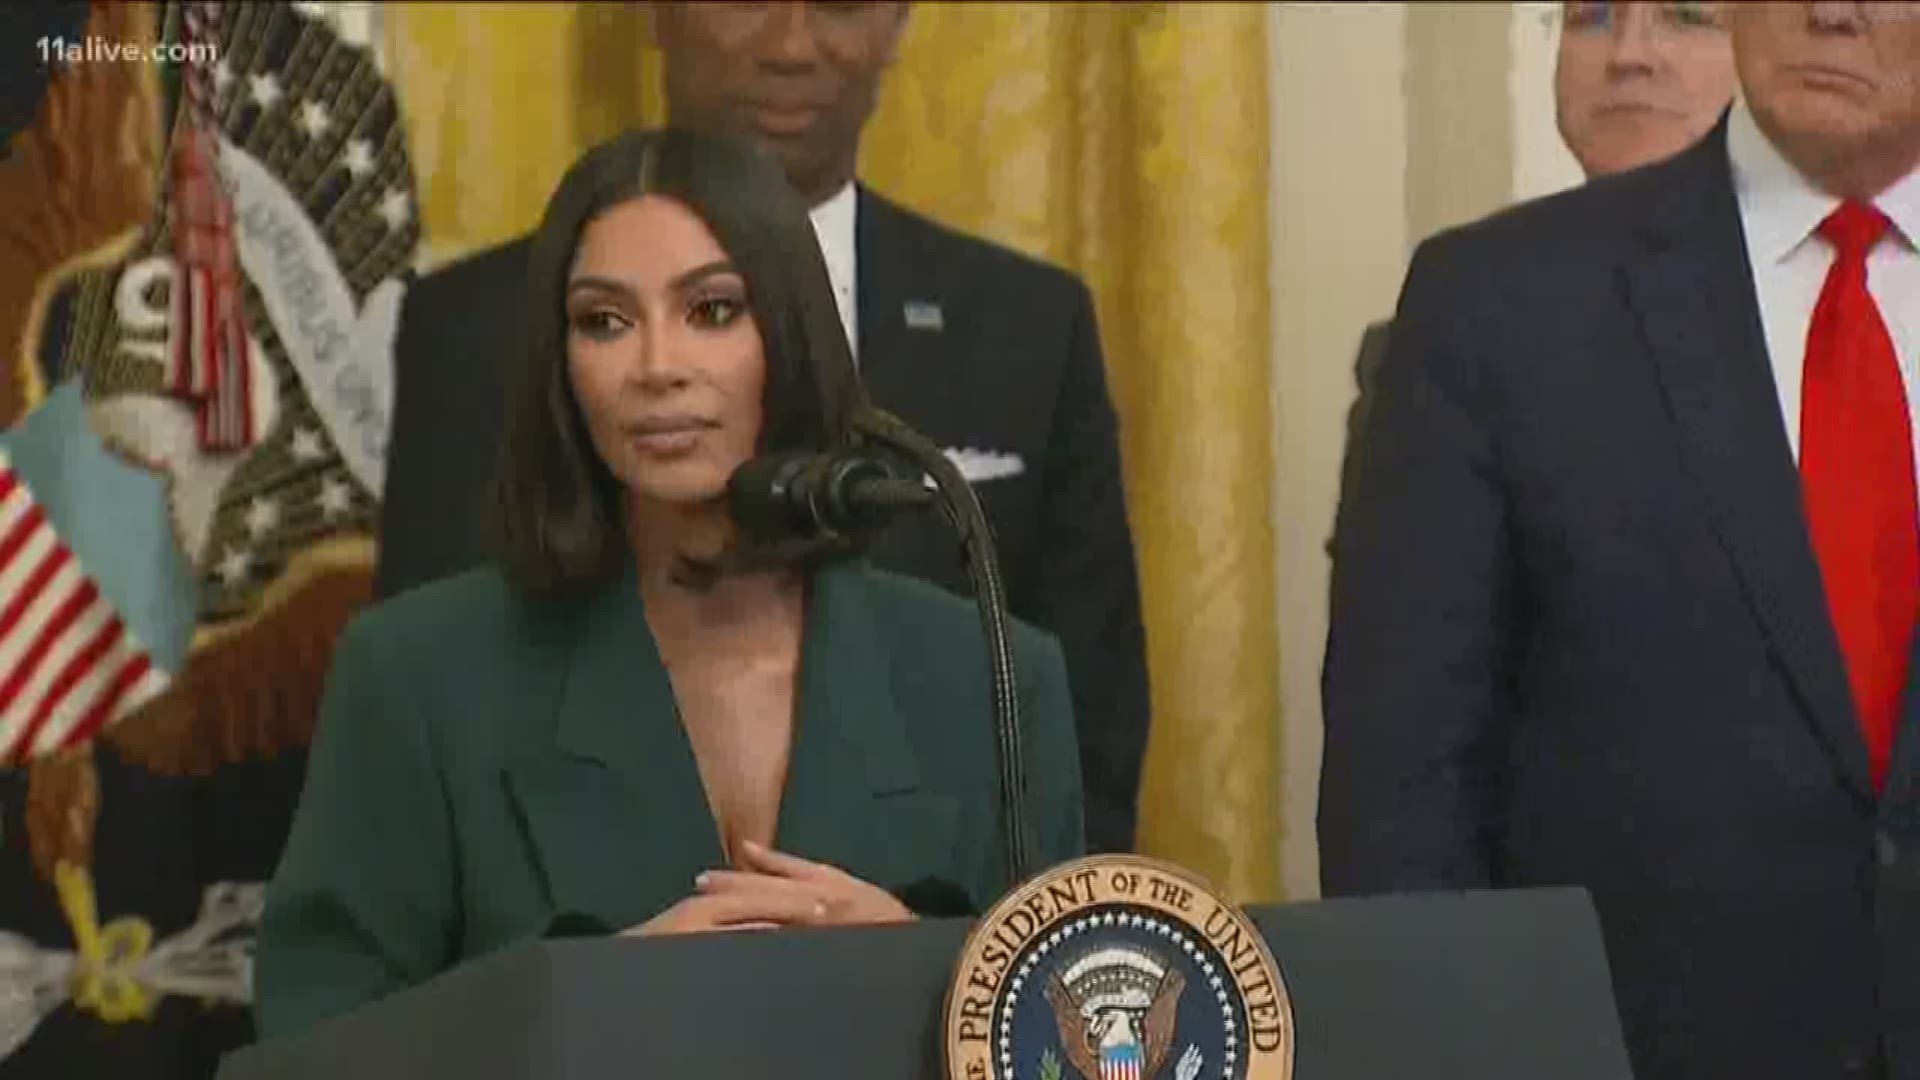 Kardashian West announced the creation of a new ride-sharing partnership that will give former prisoners gift cards to help them get to and from job interviews, work and family events.